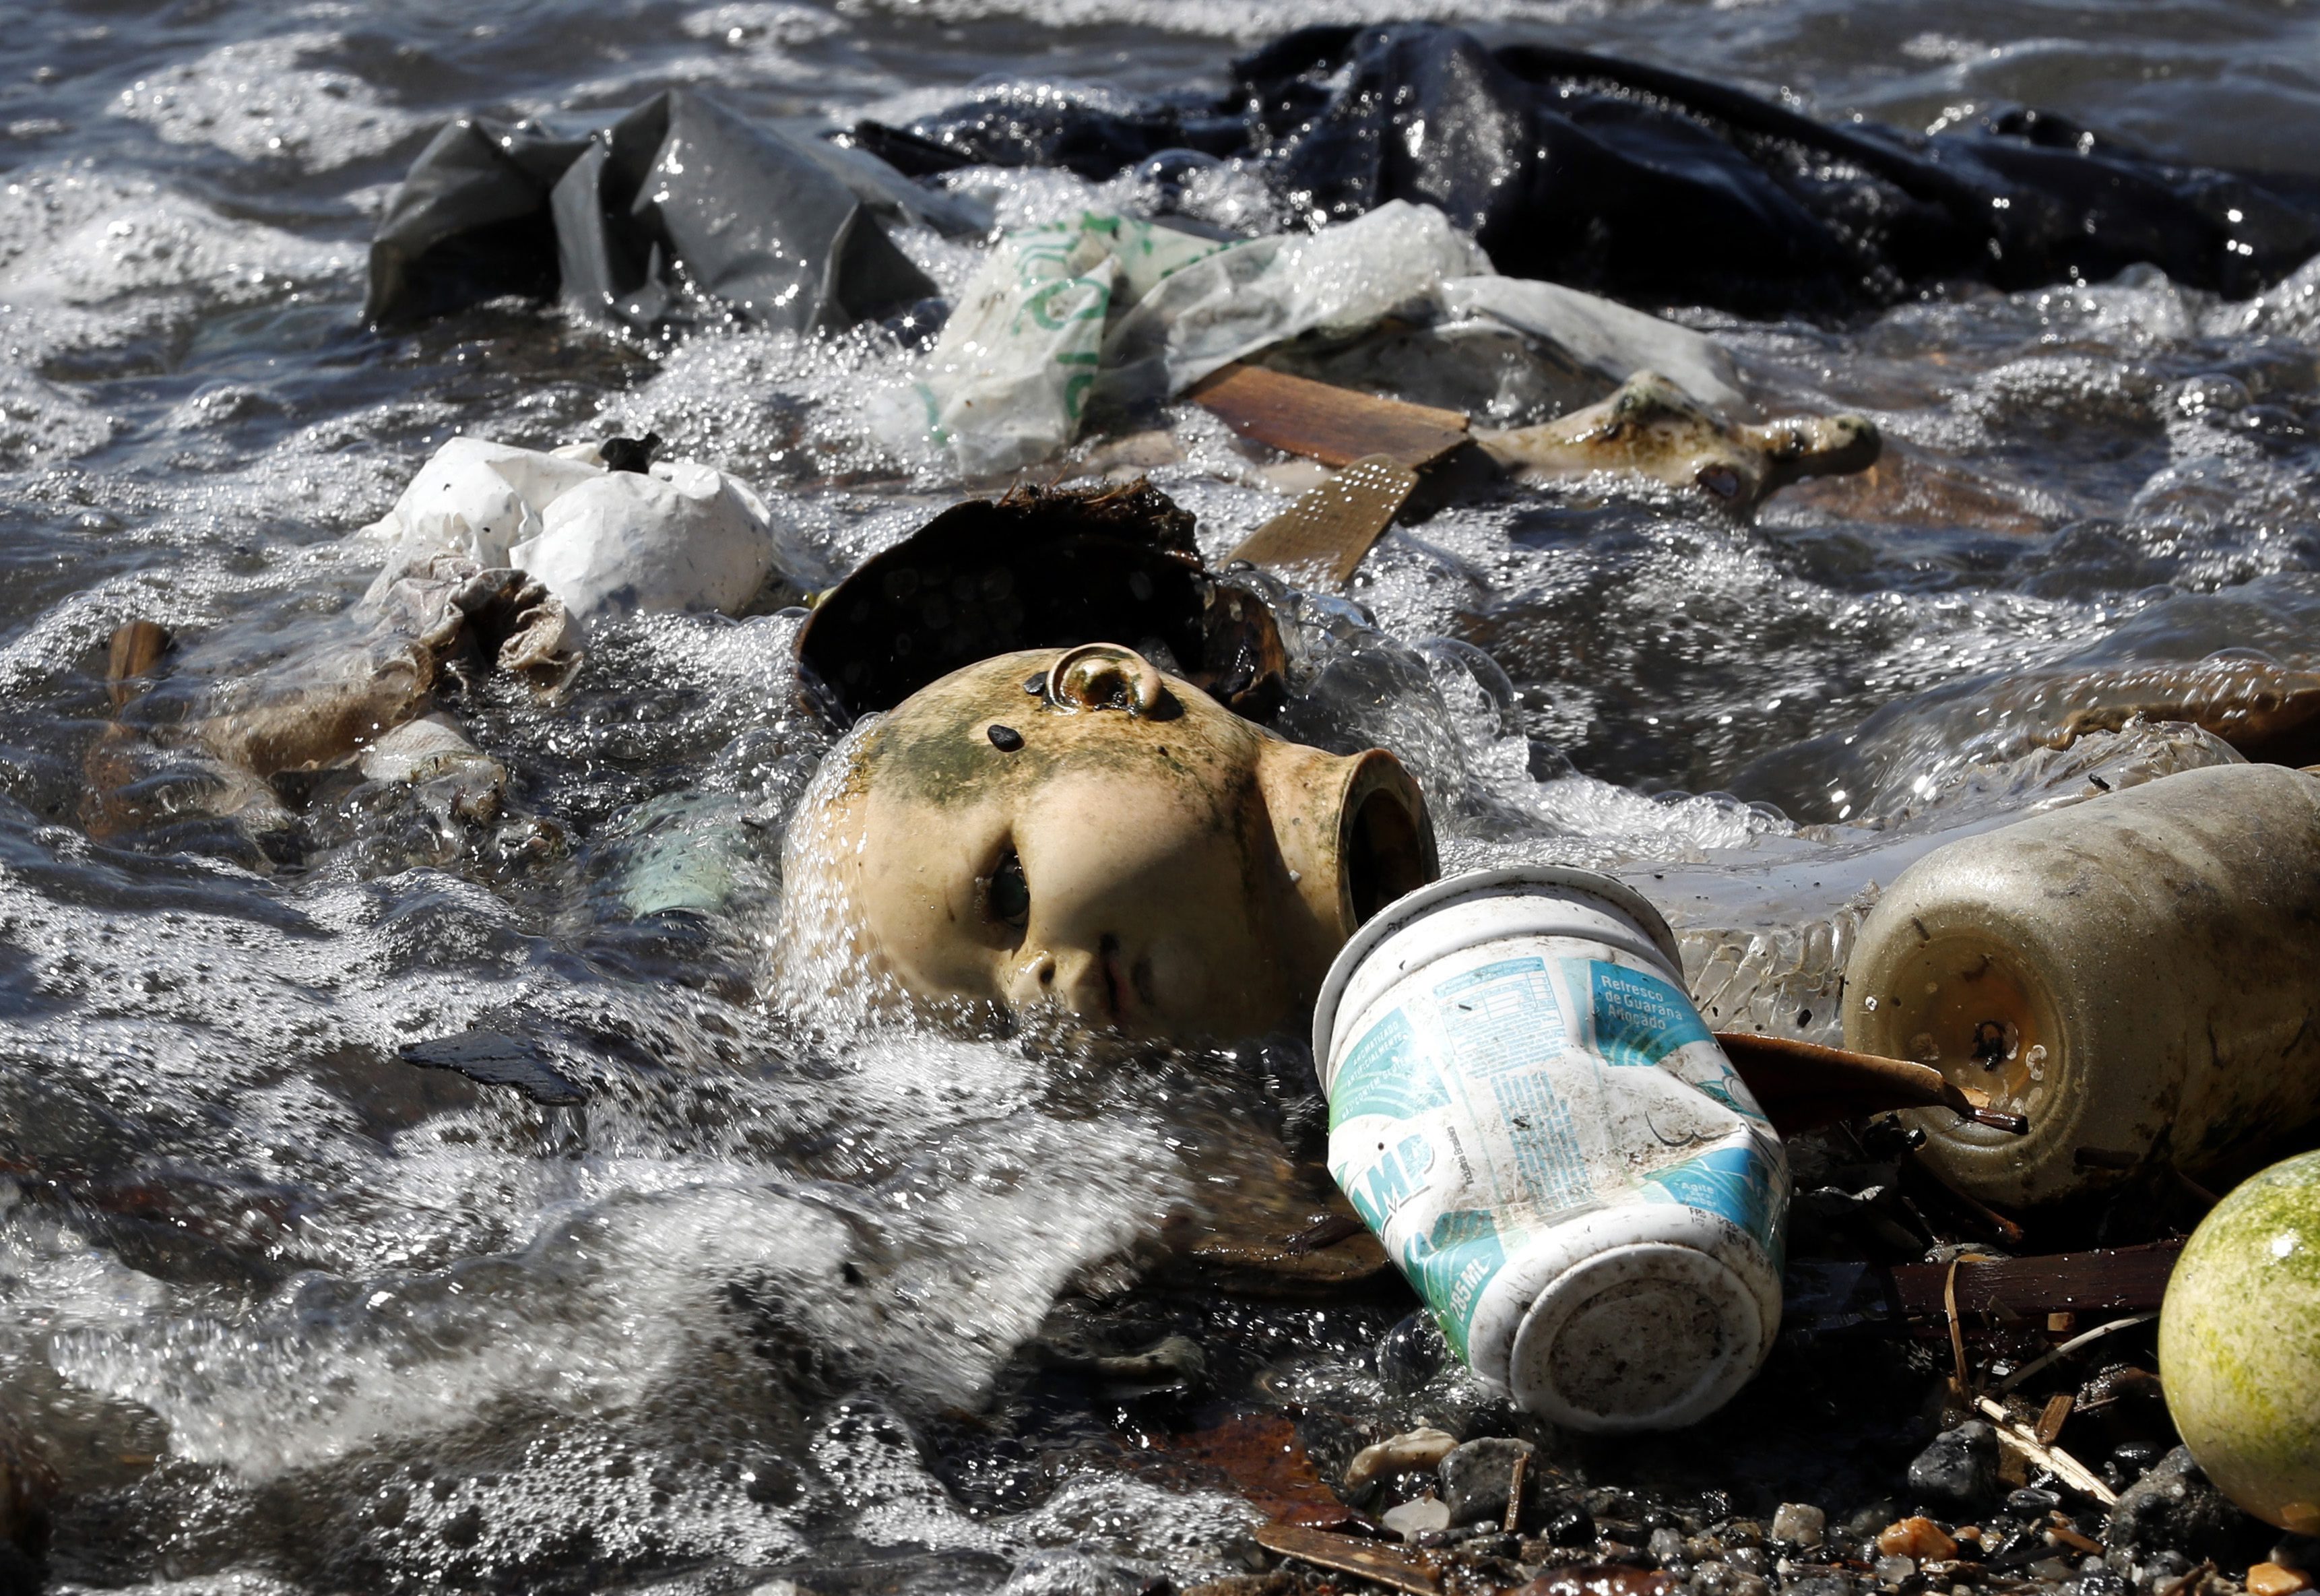 Water pollution can wipe out drink